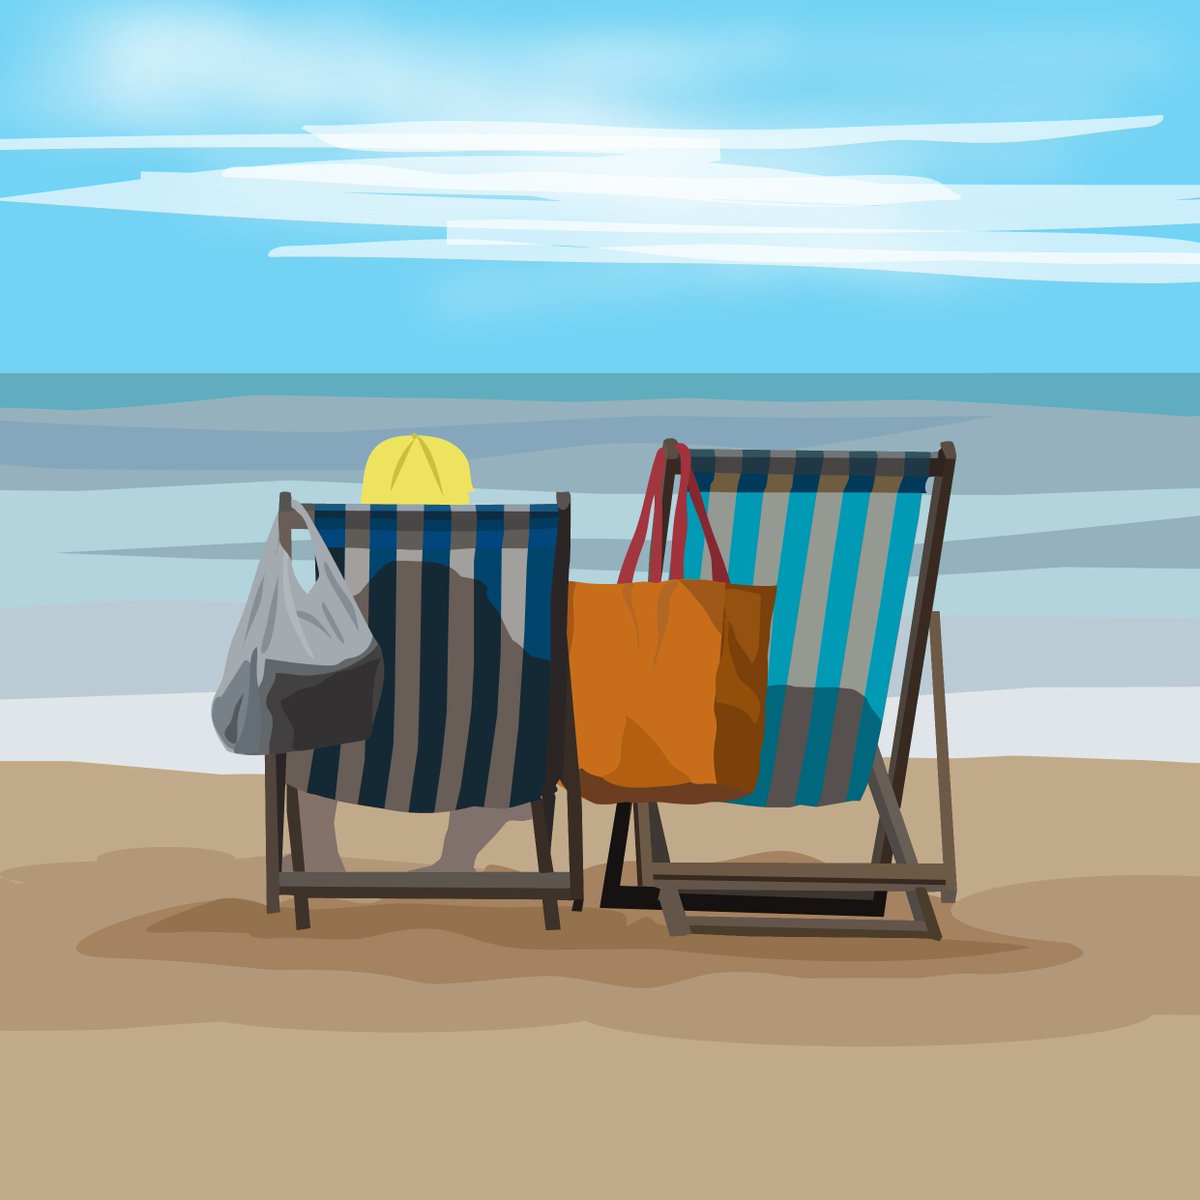 Here's some Brits at the beach for @Clr_Collective #KingsBlueLight #beachlife #illustration #englishseaside #illustrationfun #deckchairs #stripey #sandyfeet #shoppingbags #colour_collective